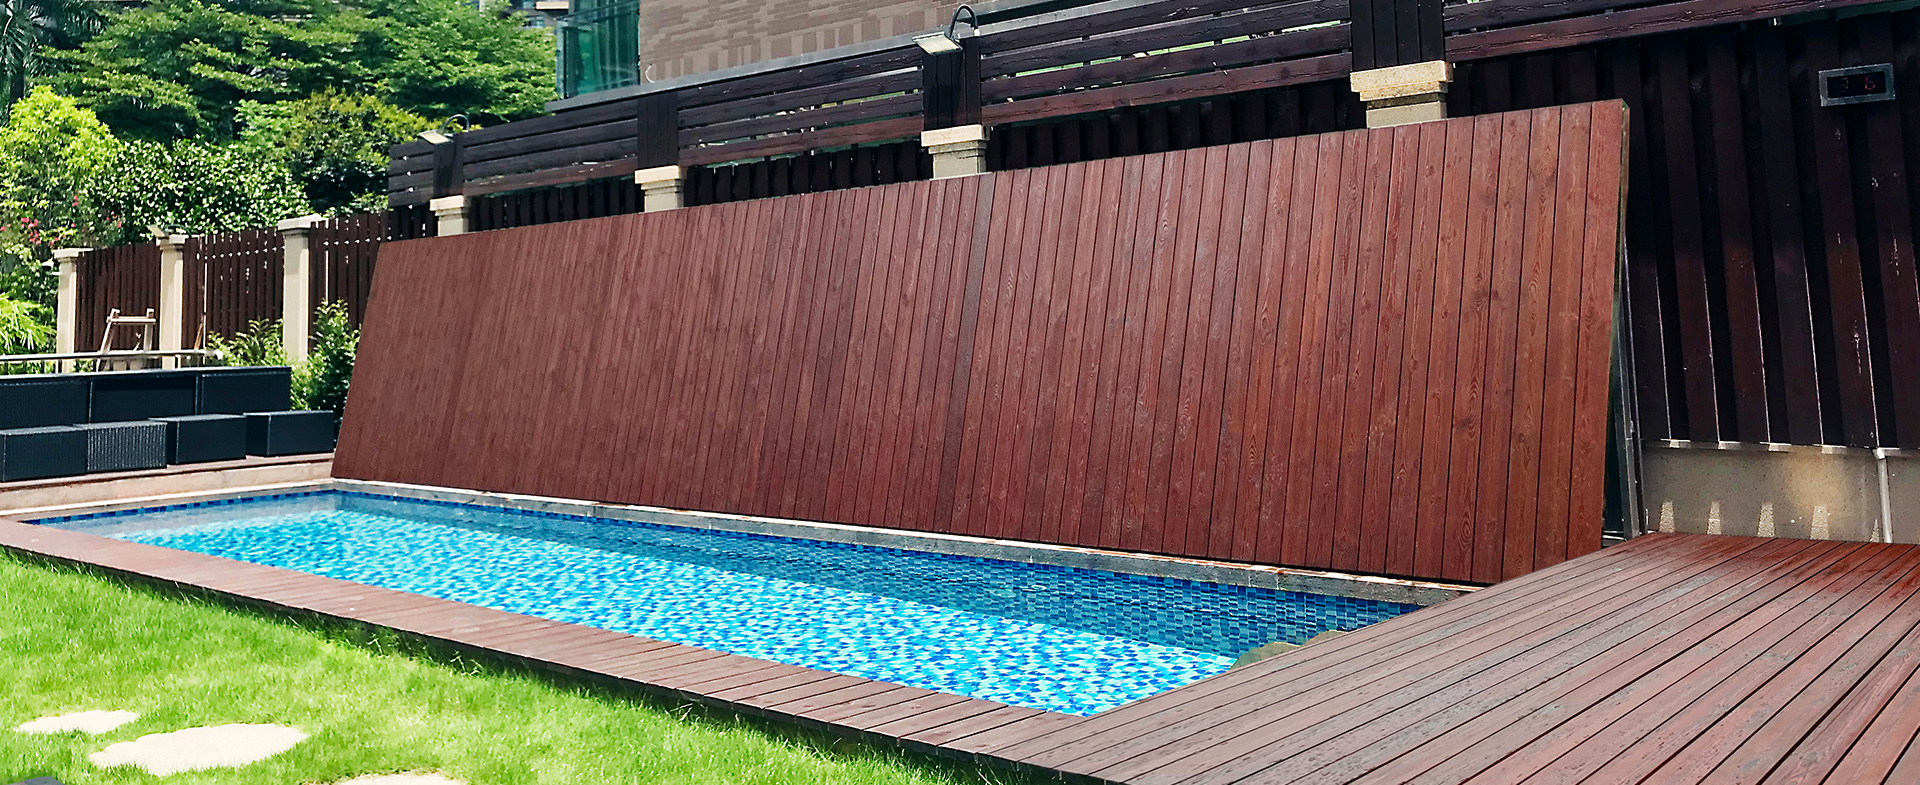 shenzhen project of folding pool cover system of BOREE